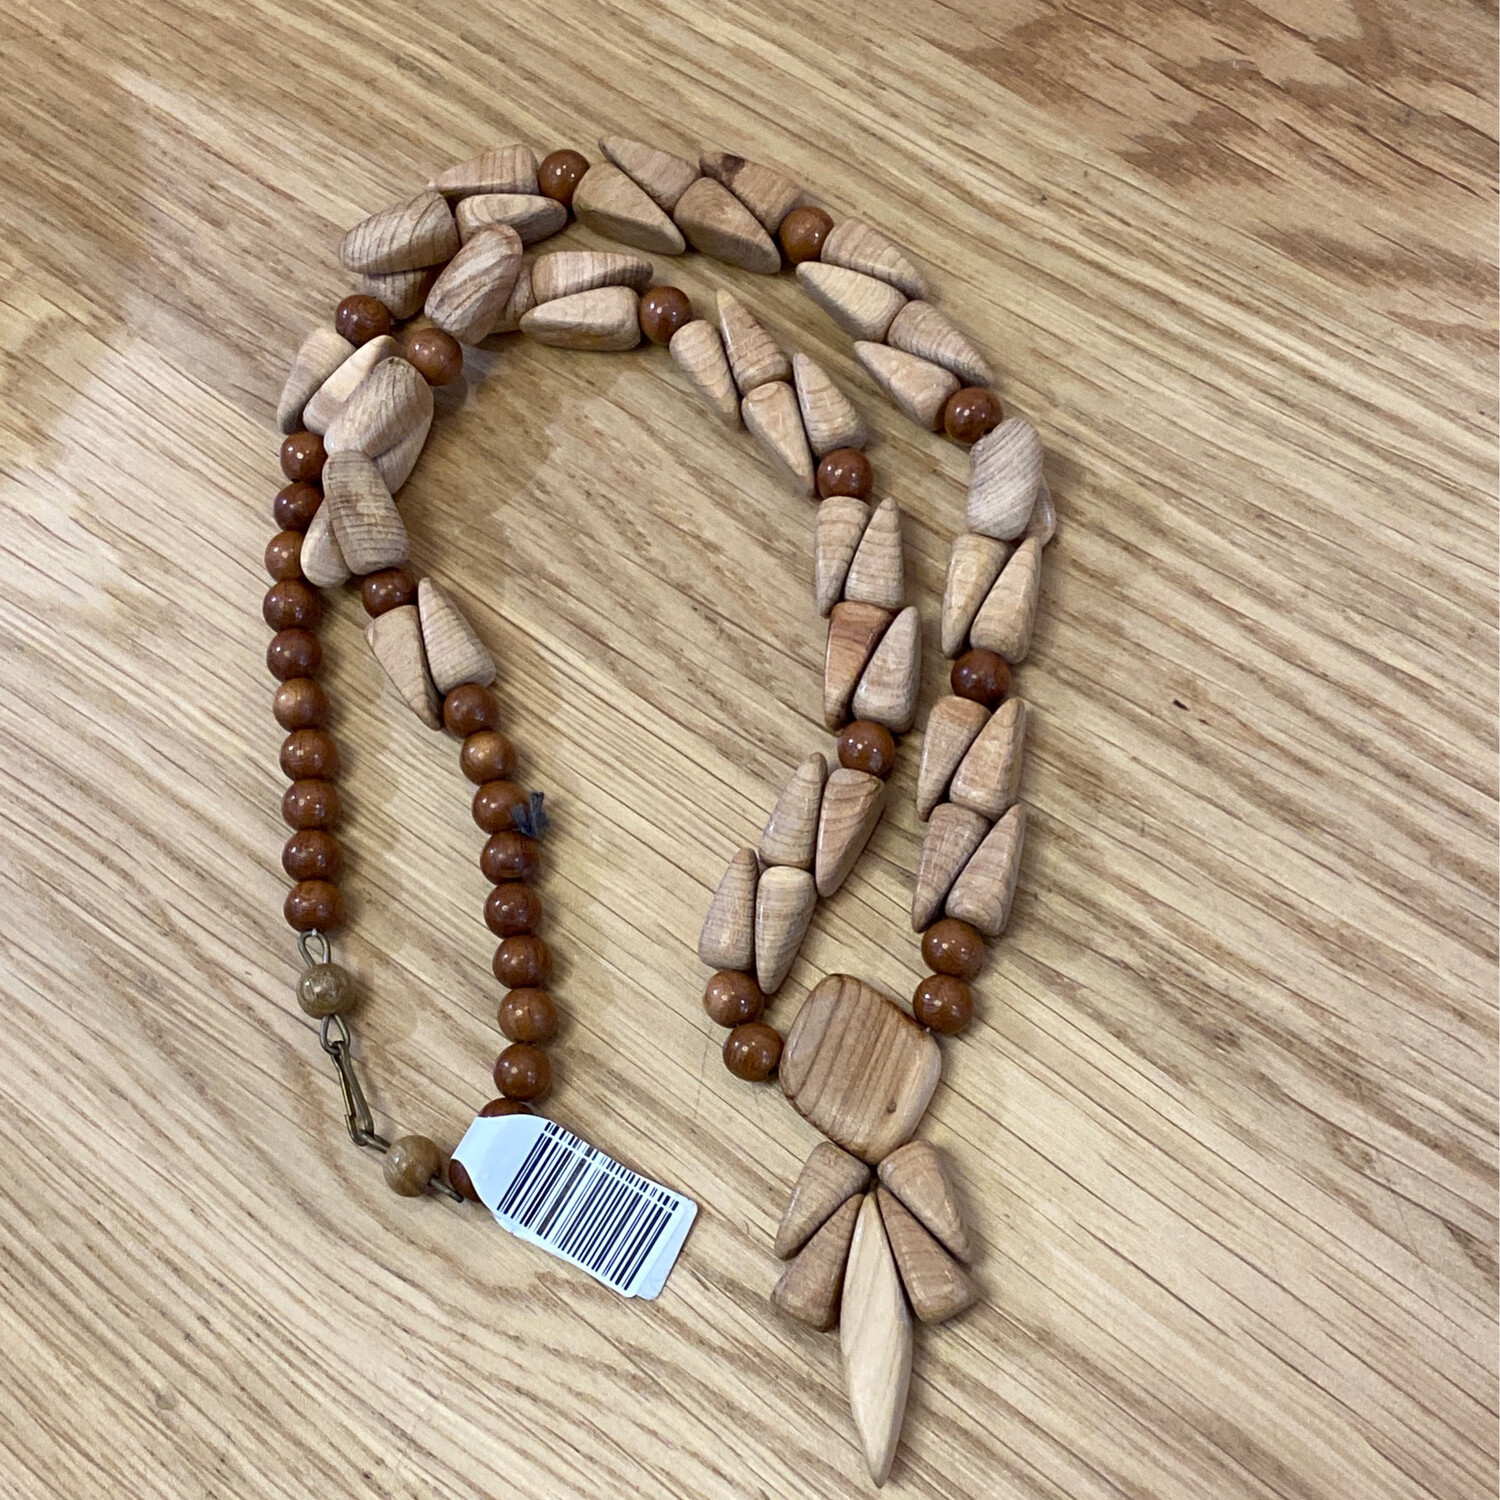 Wooden Necklace from Russia, pre-vintage